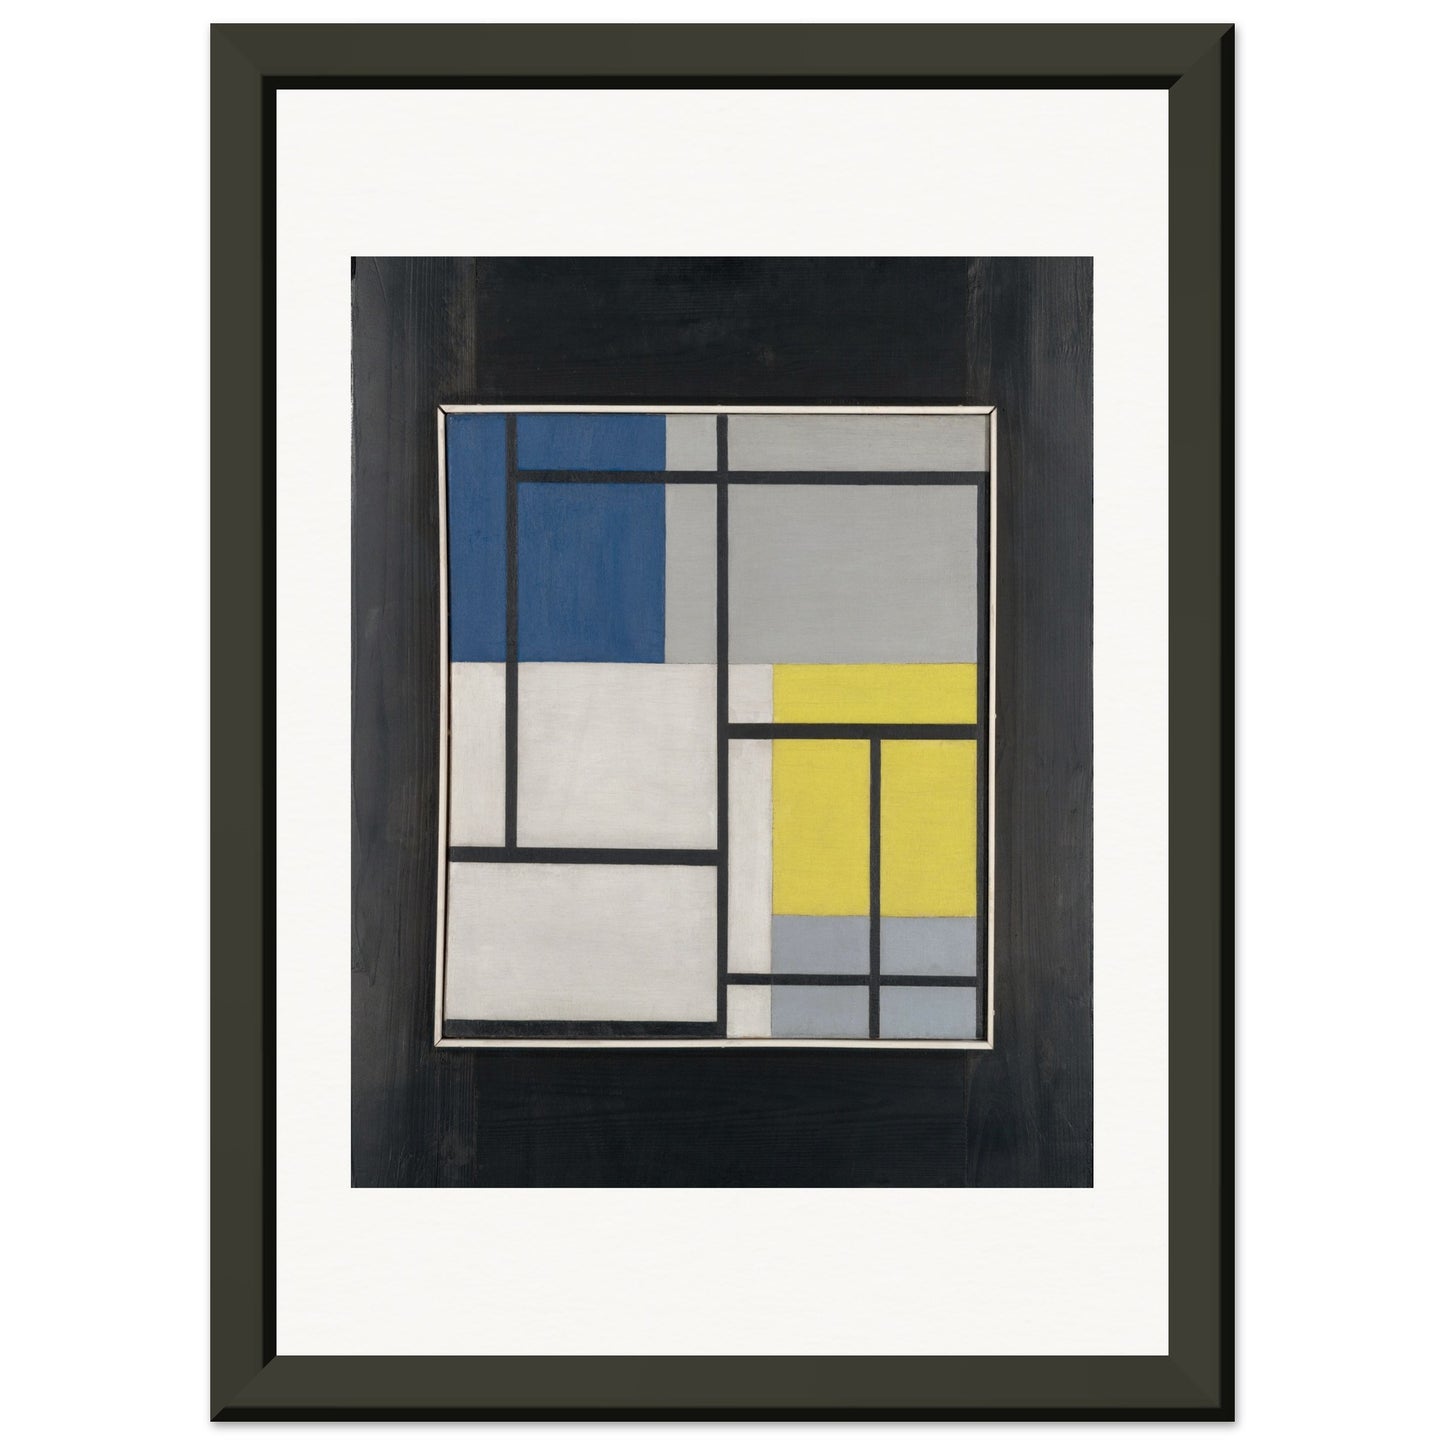 THEO VAN DOESBURG - SIMULTANEOUS COMPOSITION - MUSEUM MATTE POSTER IN METAL FRAME